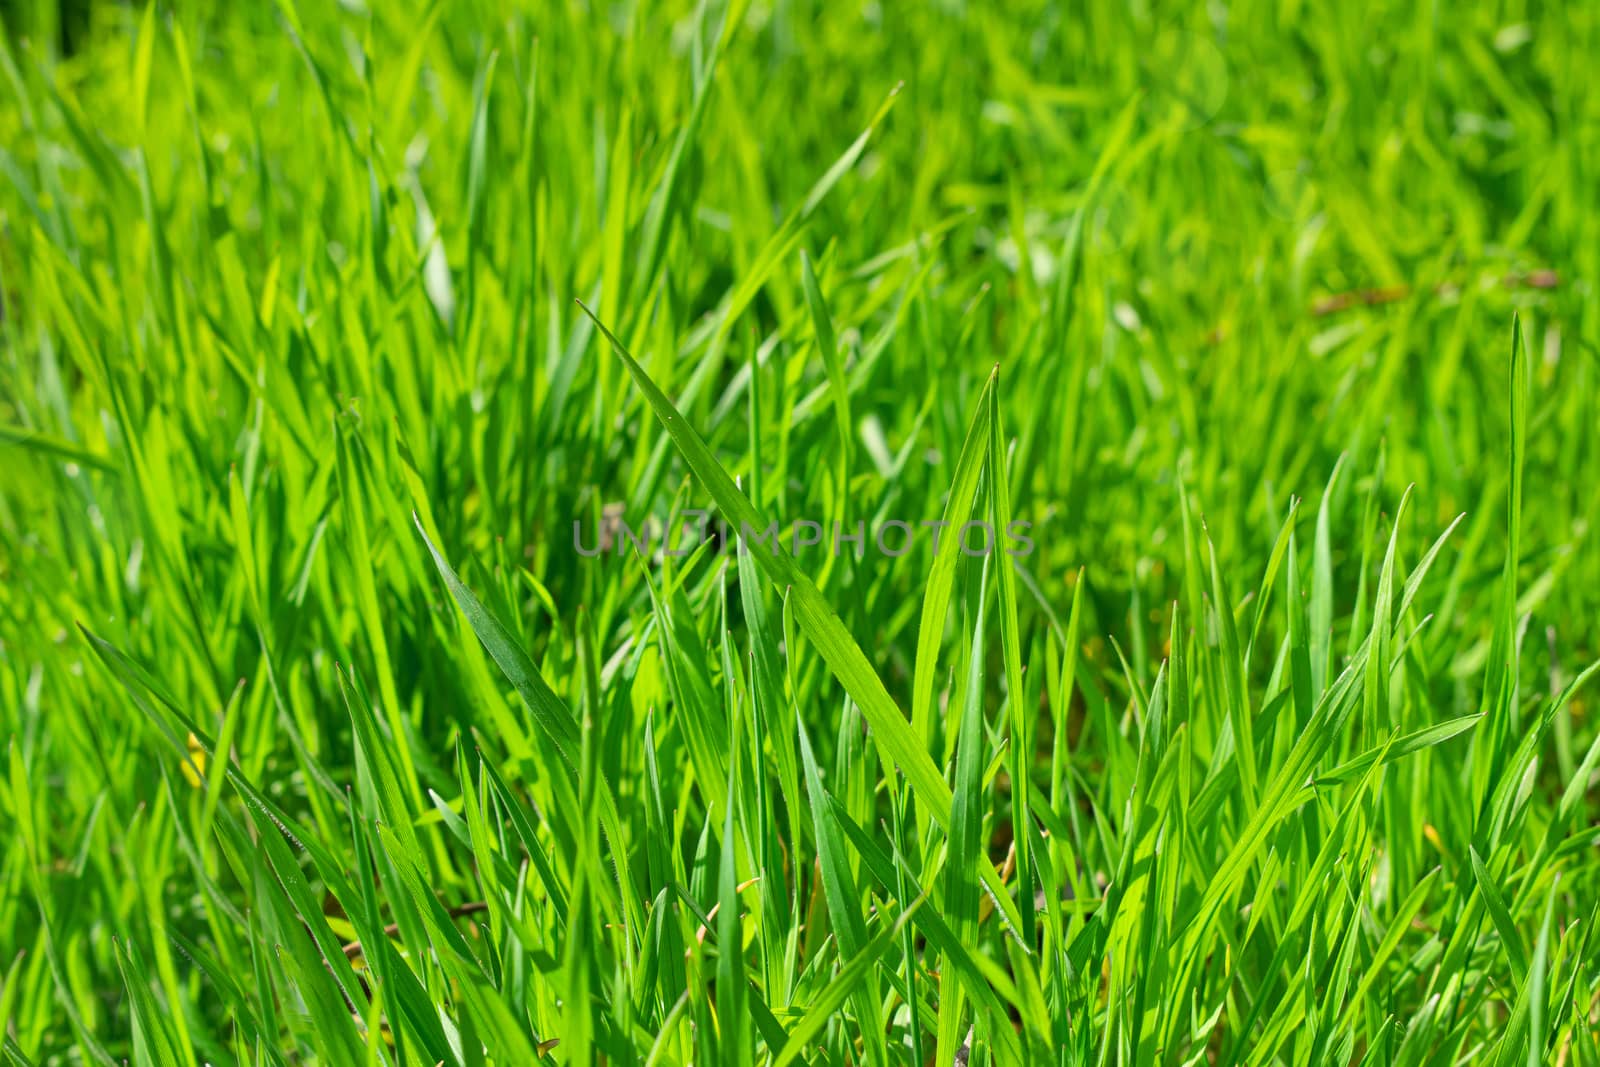 Grass close up with shallow depth of field. by GraffiTimi